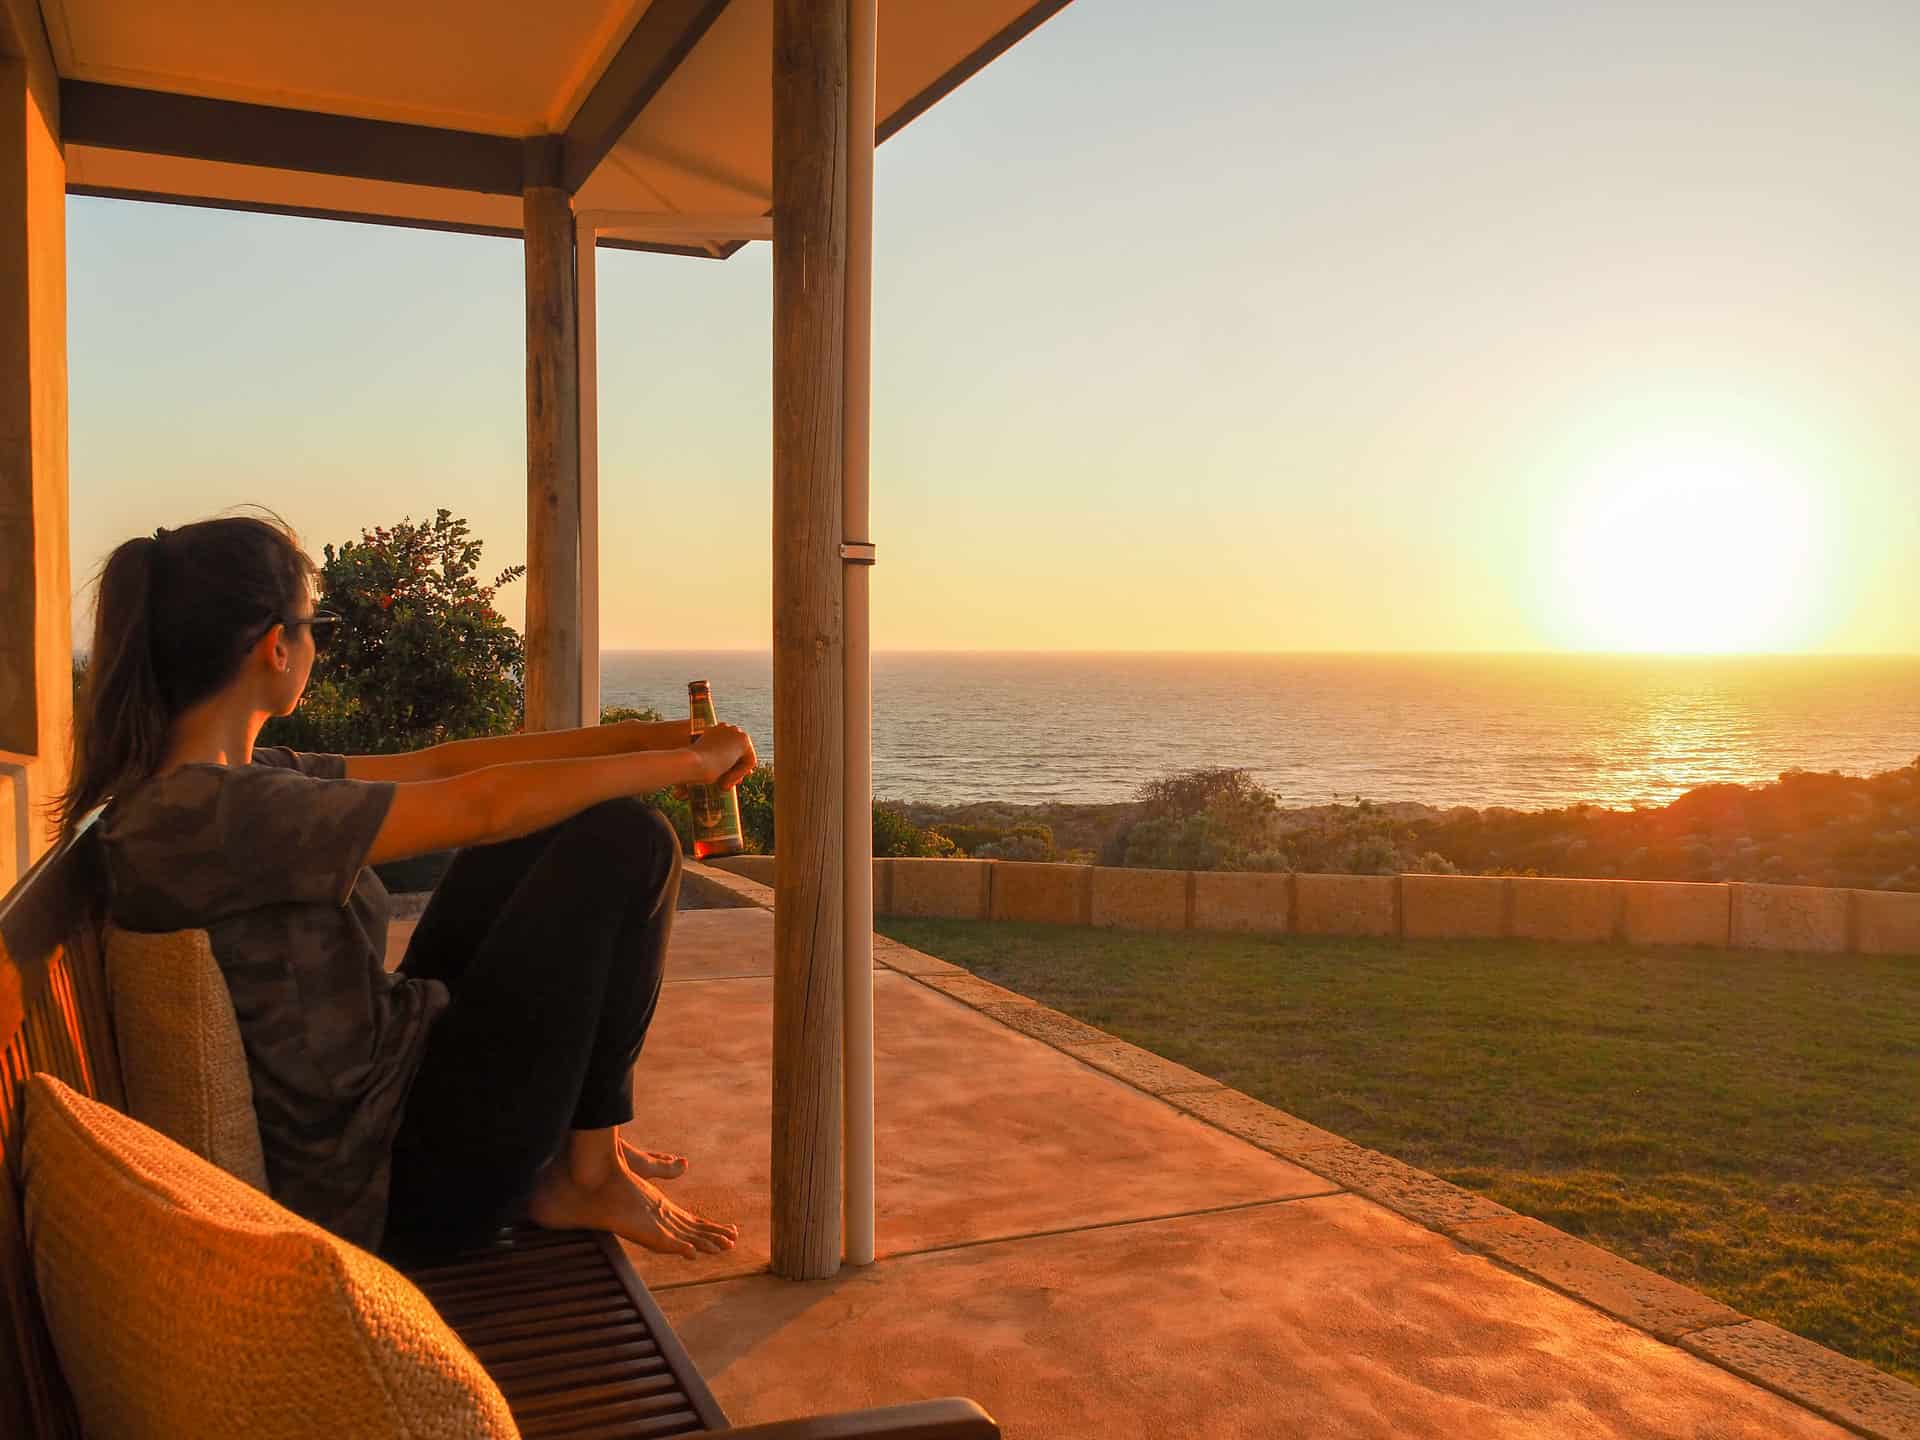 Watching an Indian Ocean sunset at The Glass House WA Airbnb in Greenough, Western Australia